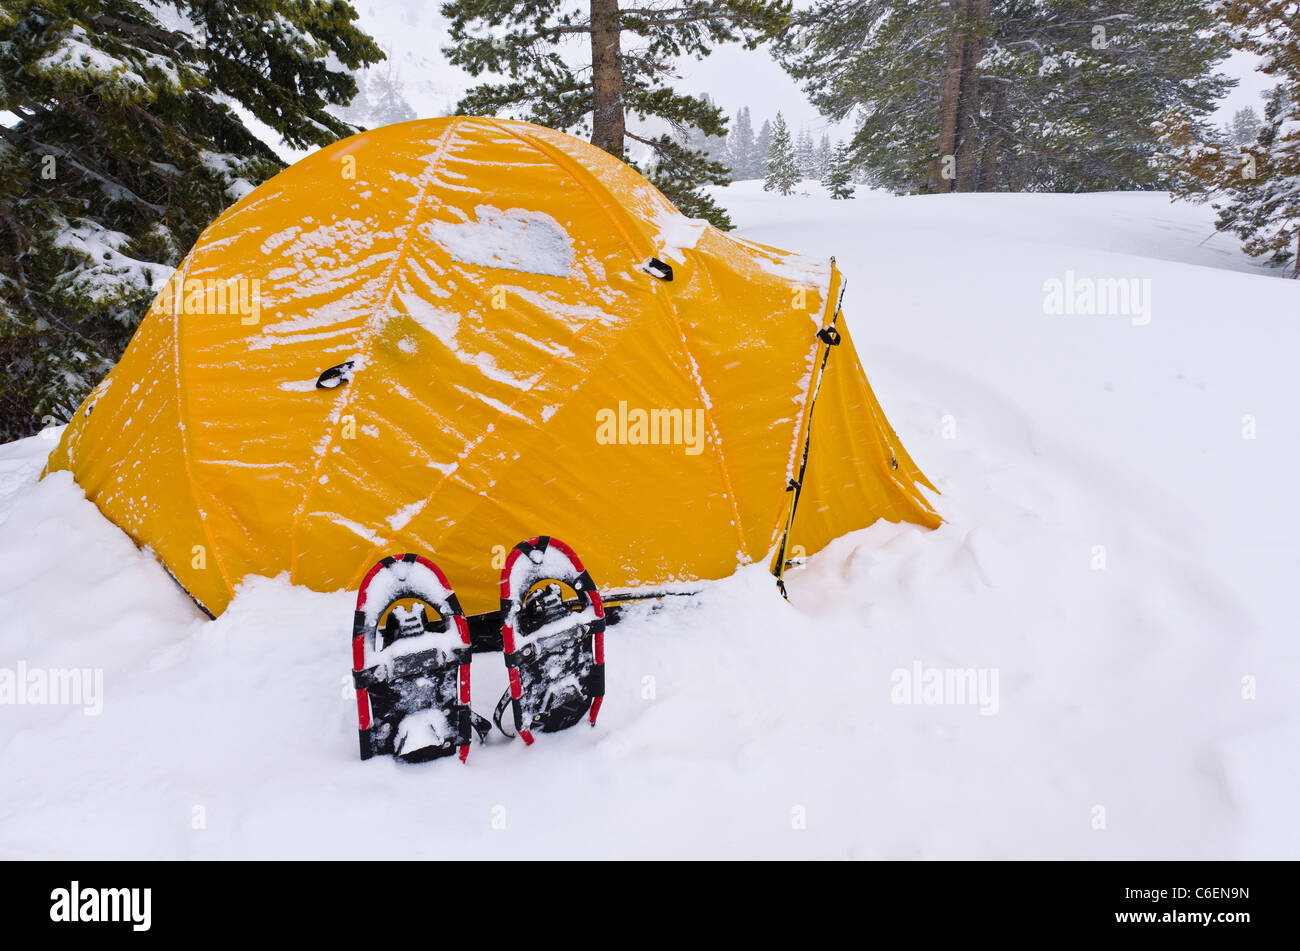 Yellow dome tent and snow shoes, Ansel Adams Wilderness, Sierra Nevada Mountains, California USA Stock Photo